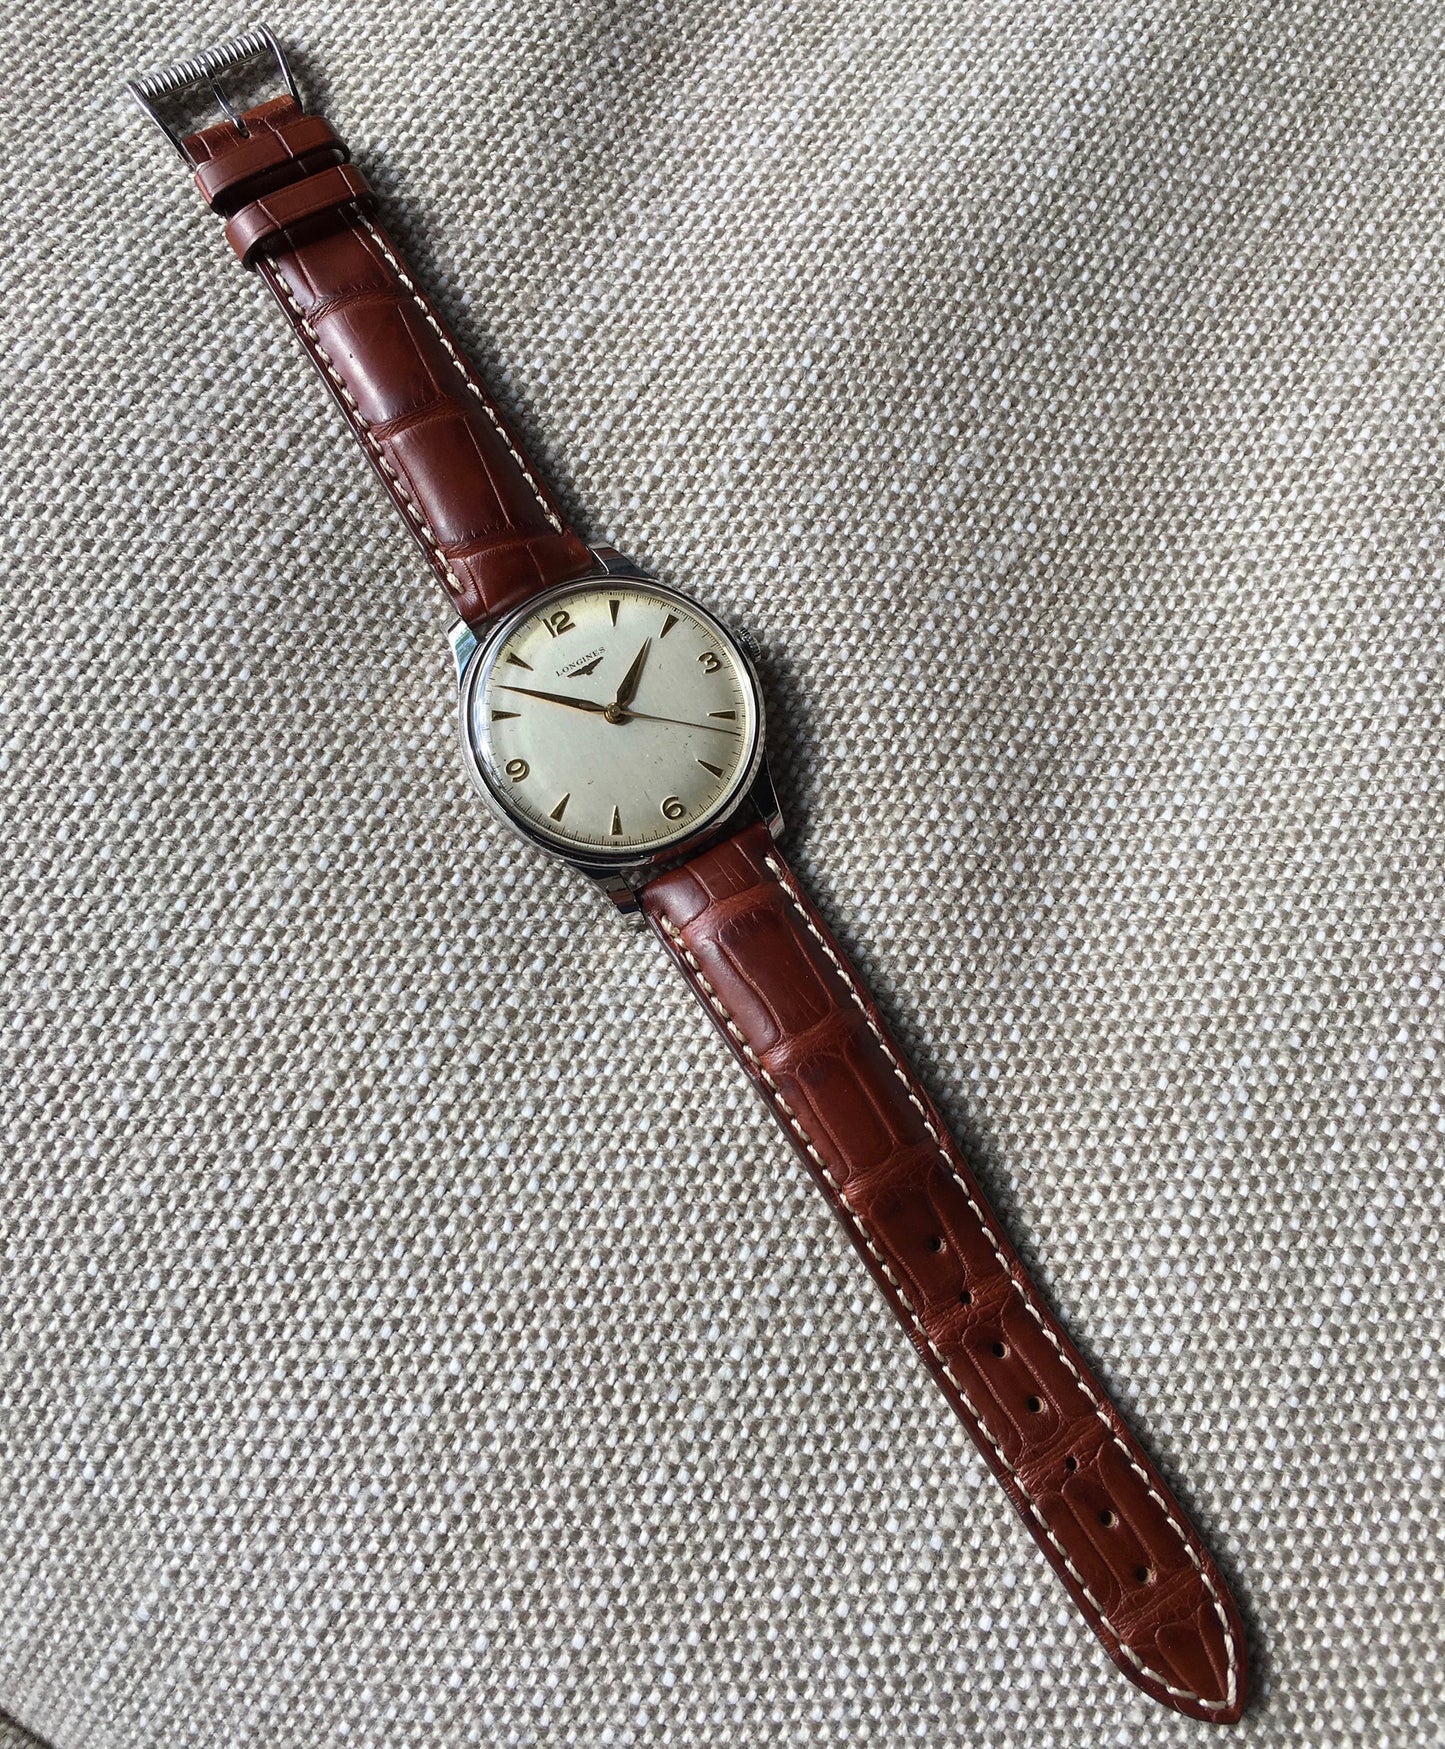 Vintage Longines 5045 Oversized 37mm Center Seconds Cal. 12.68z Wristwatch - Hashtag Watch Company